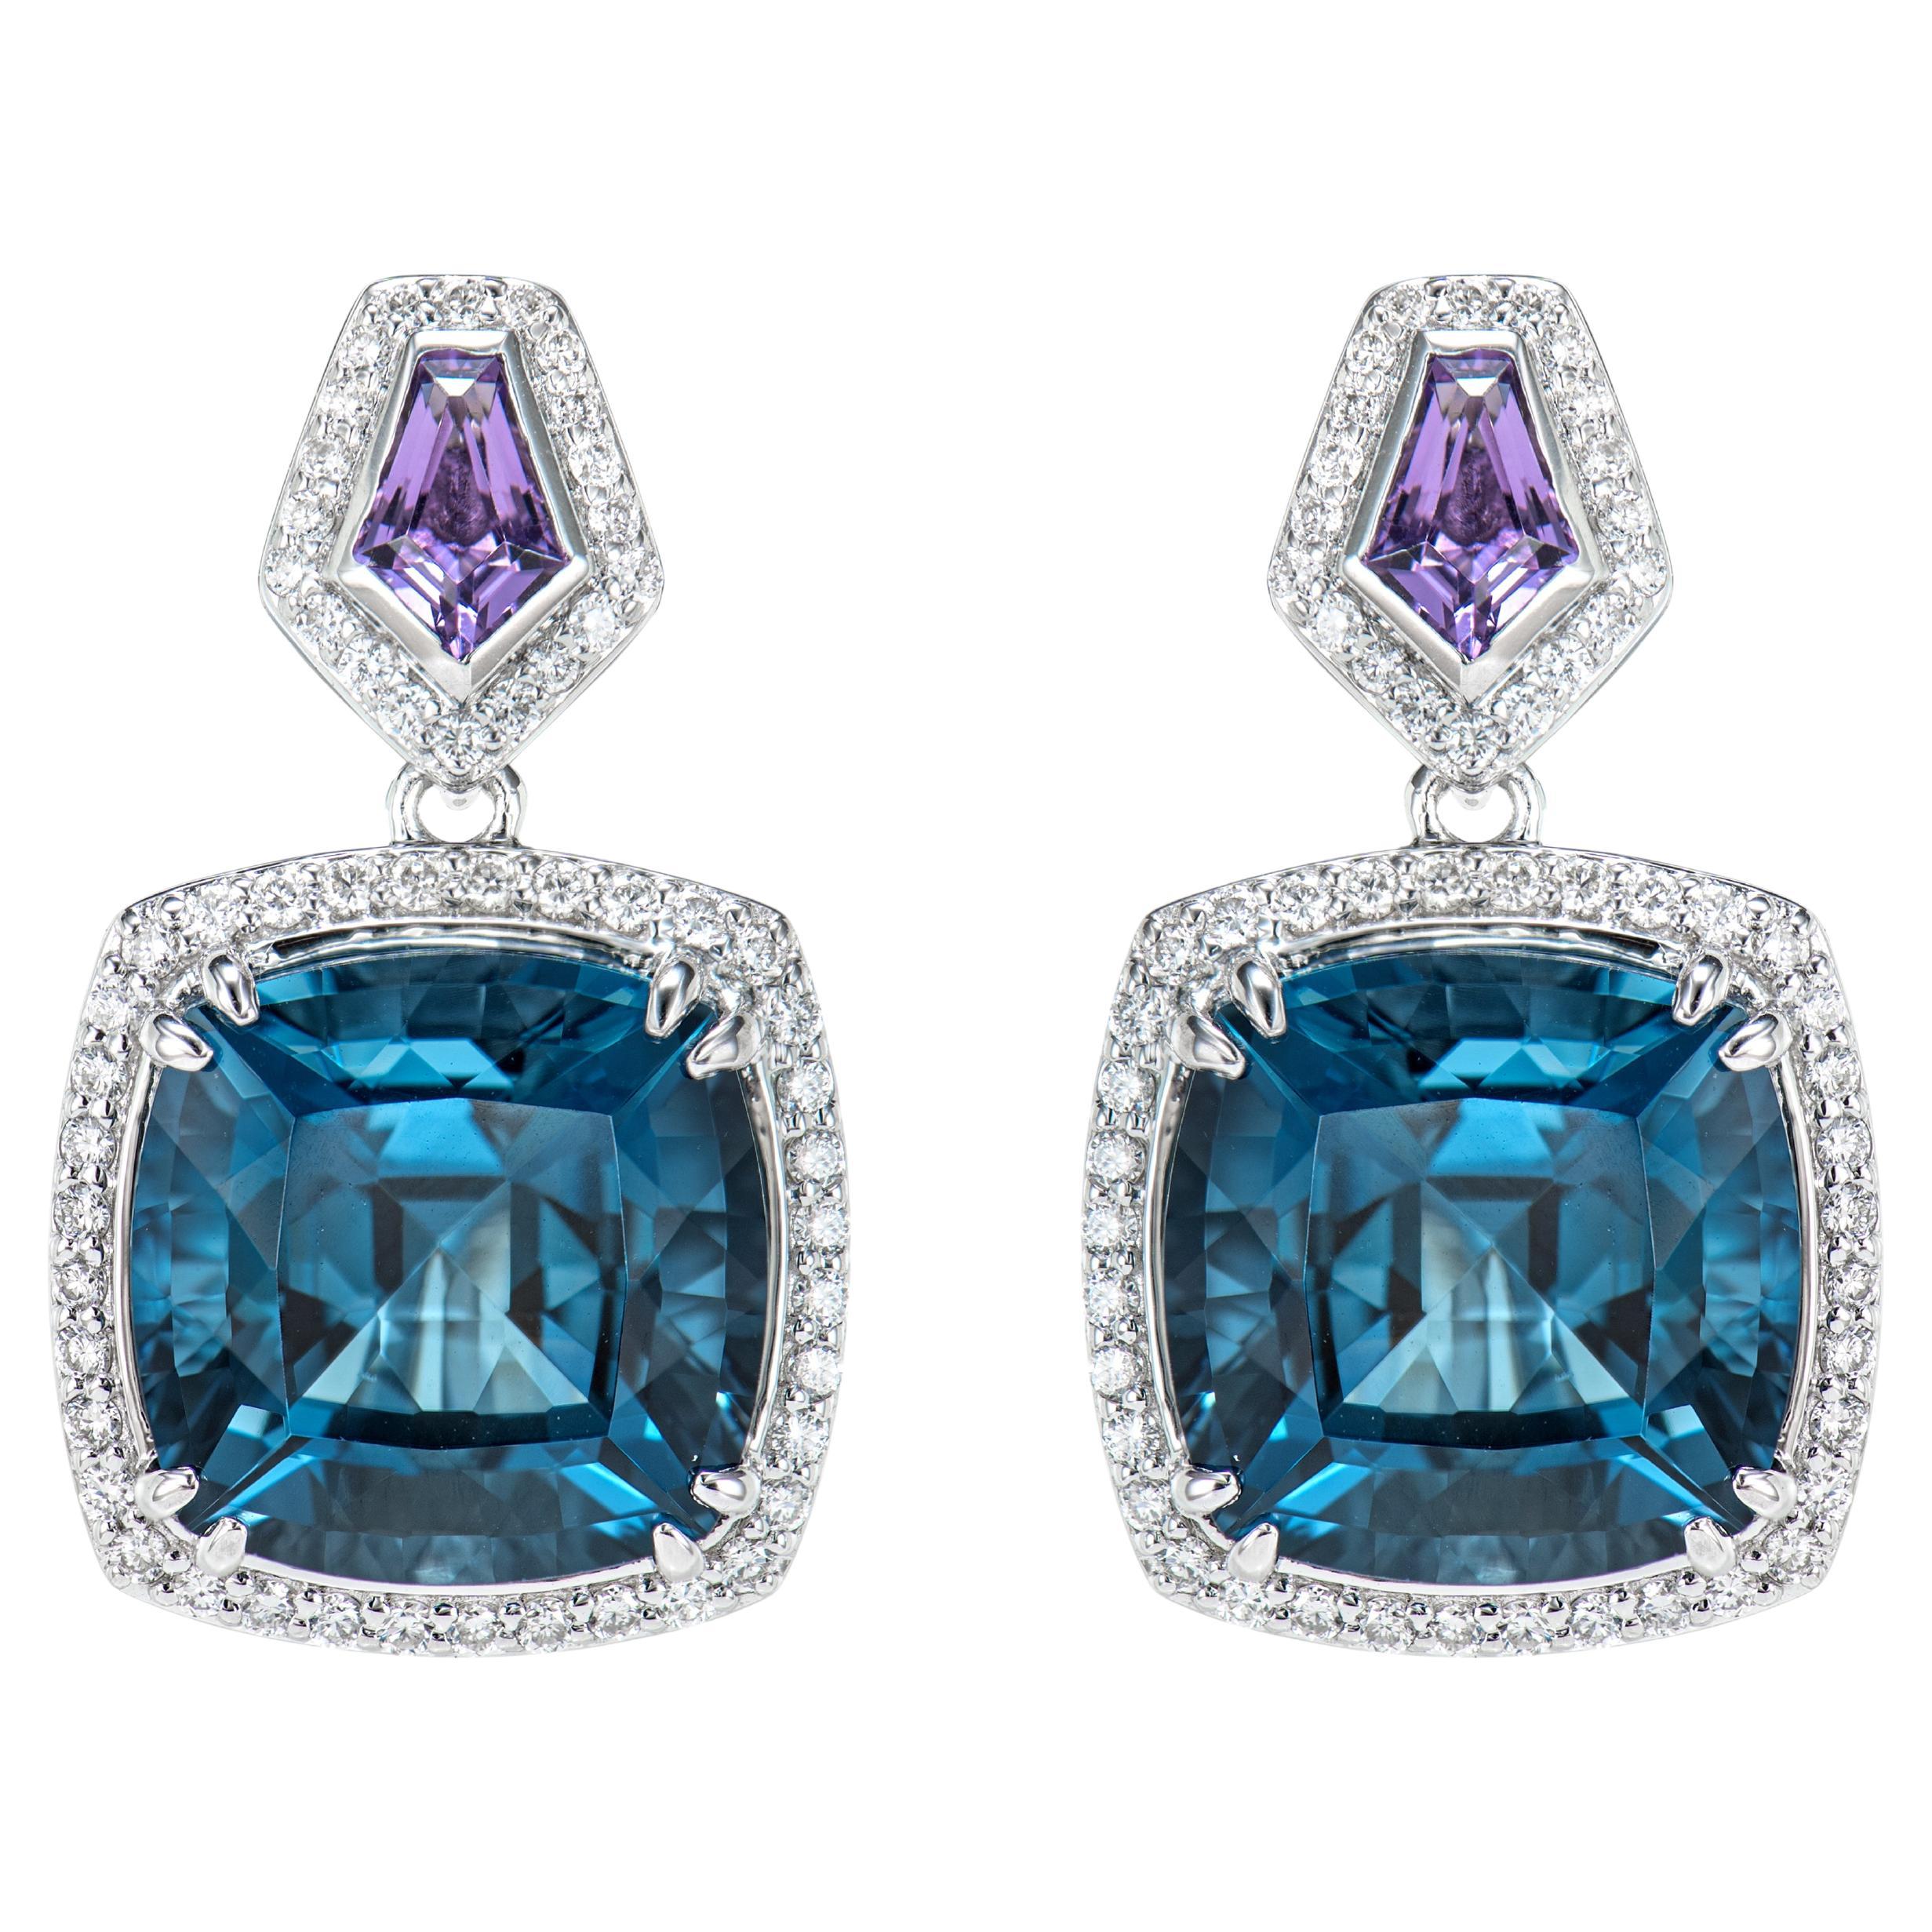 18.43 Carat London Blue Topaz Drop Earrings in 18KWG with Amethyst and Diamond. For Sale